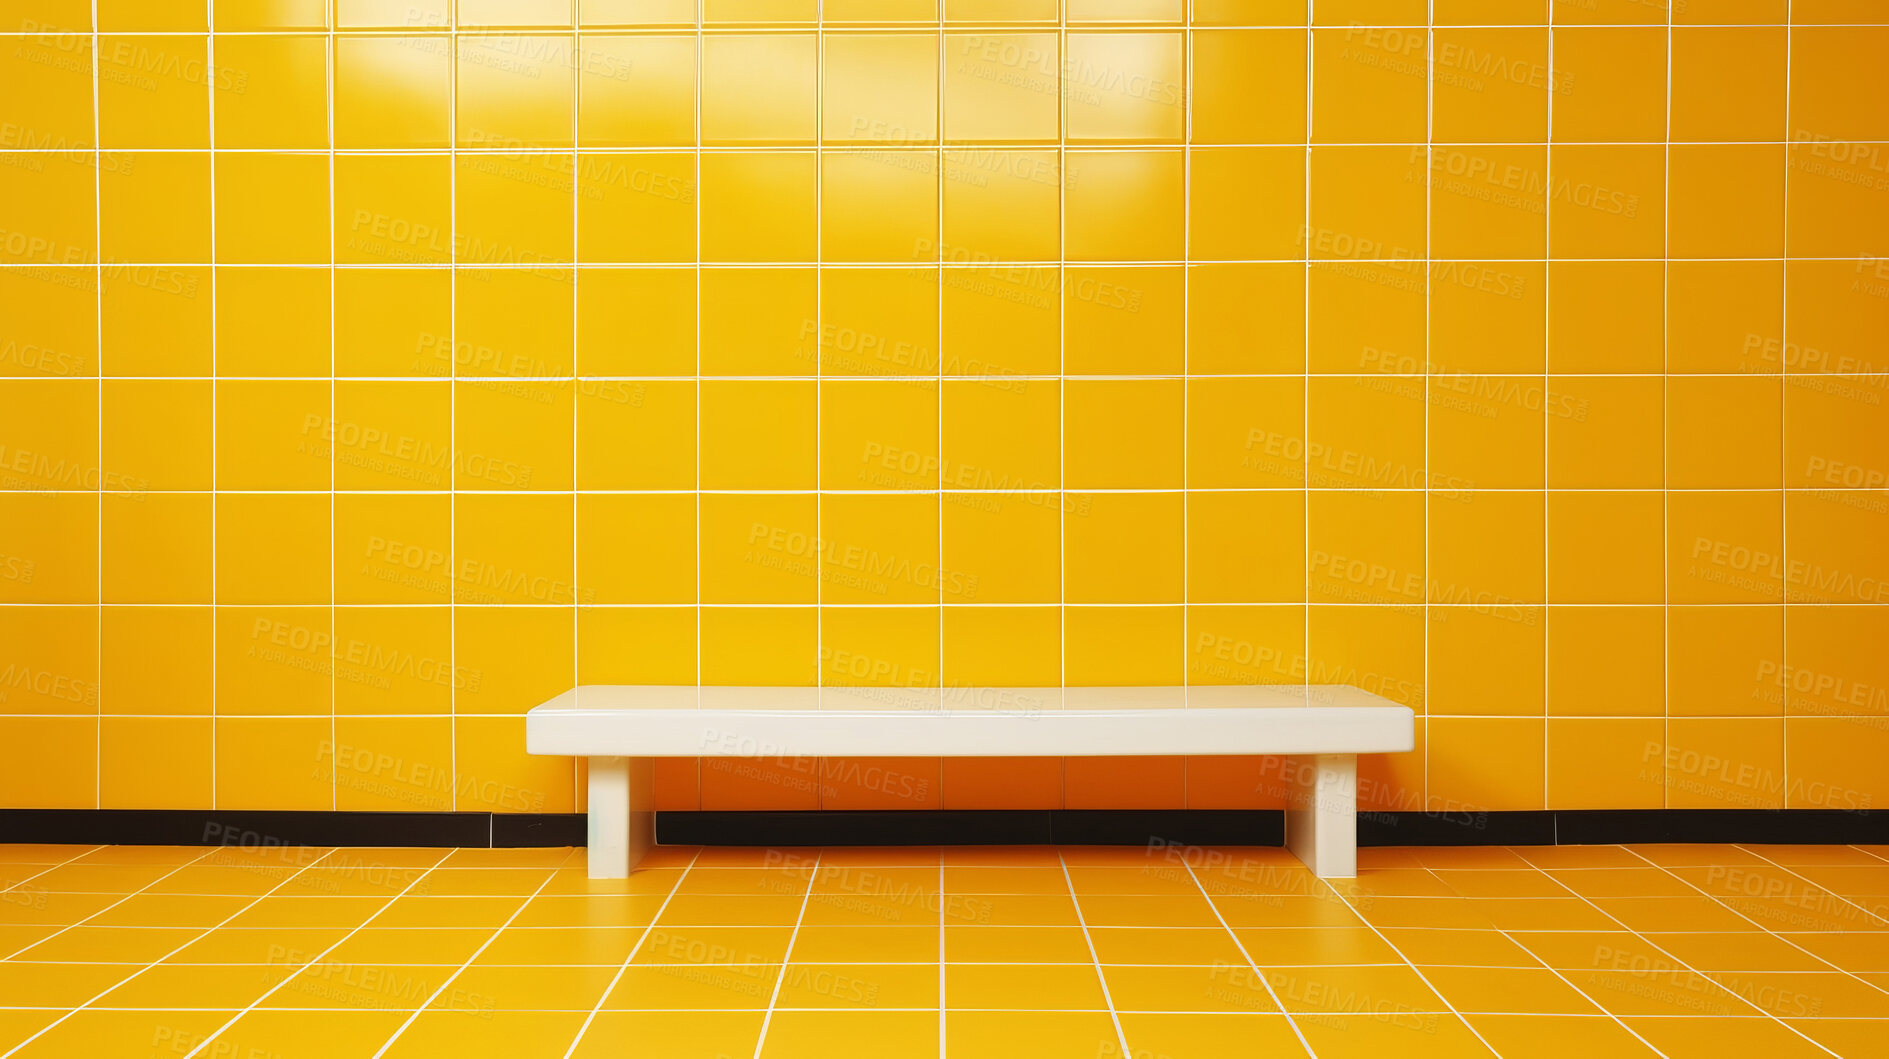 Buy stock photo Yellow ceramic tile wall or floor with bench background. Design wallpaper copyspace